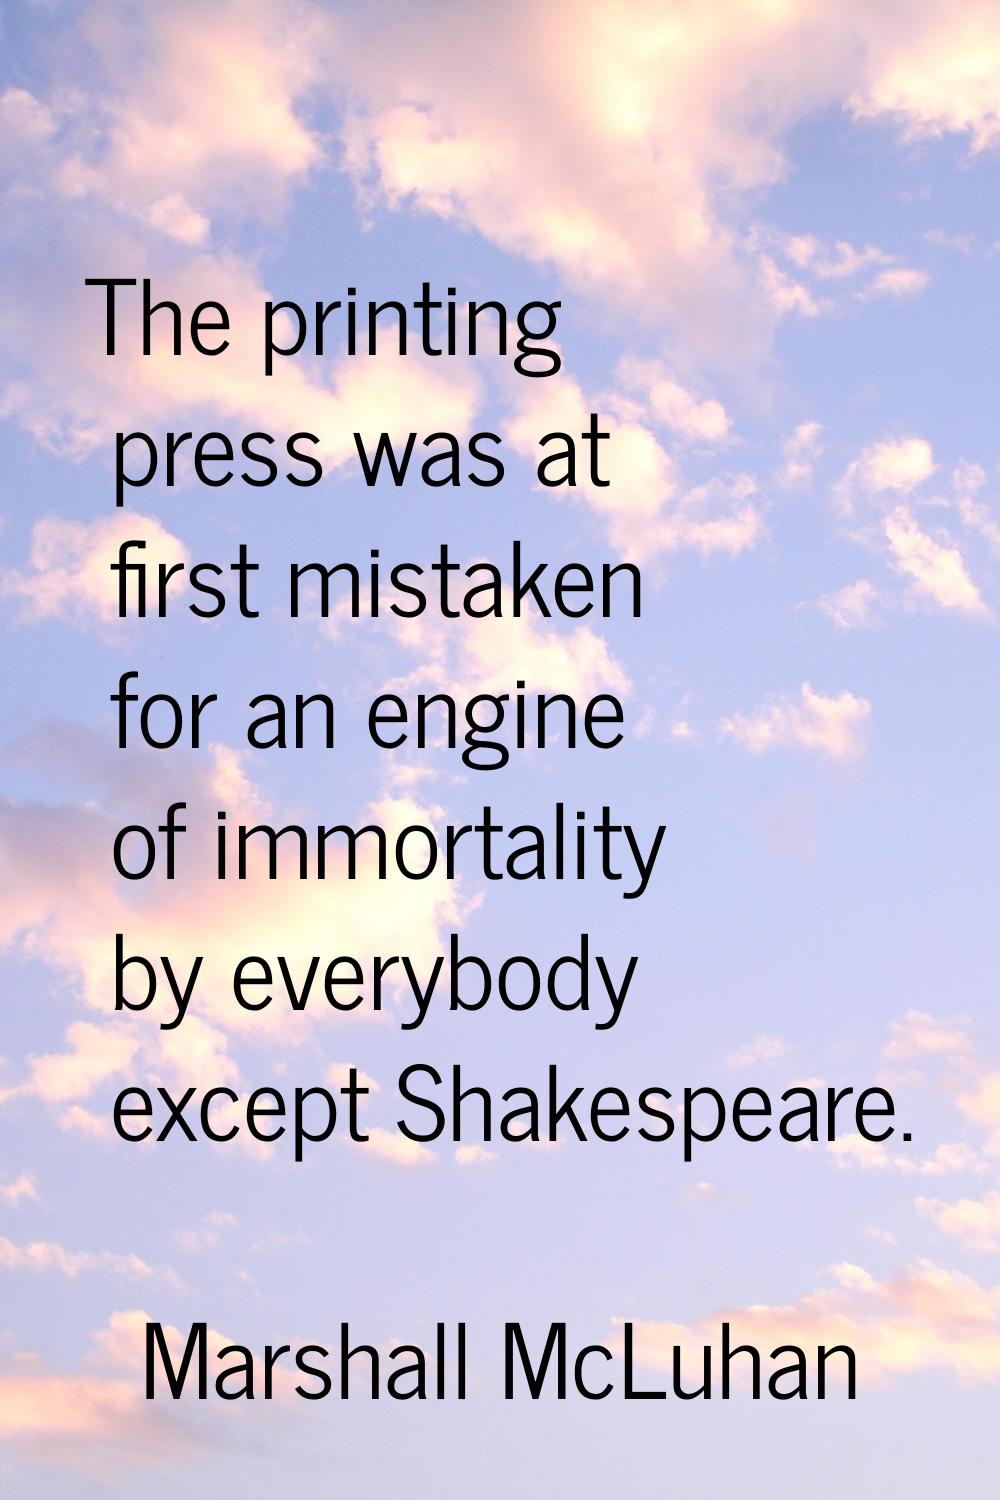 The printing press was at first mistaken for an engine of immortality by everybody except Shakespea